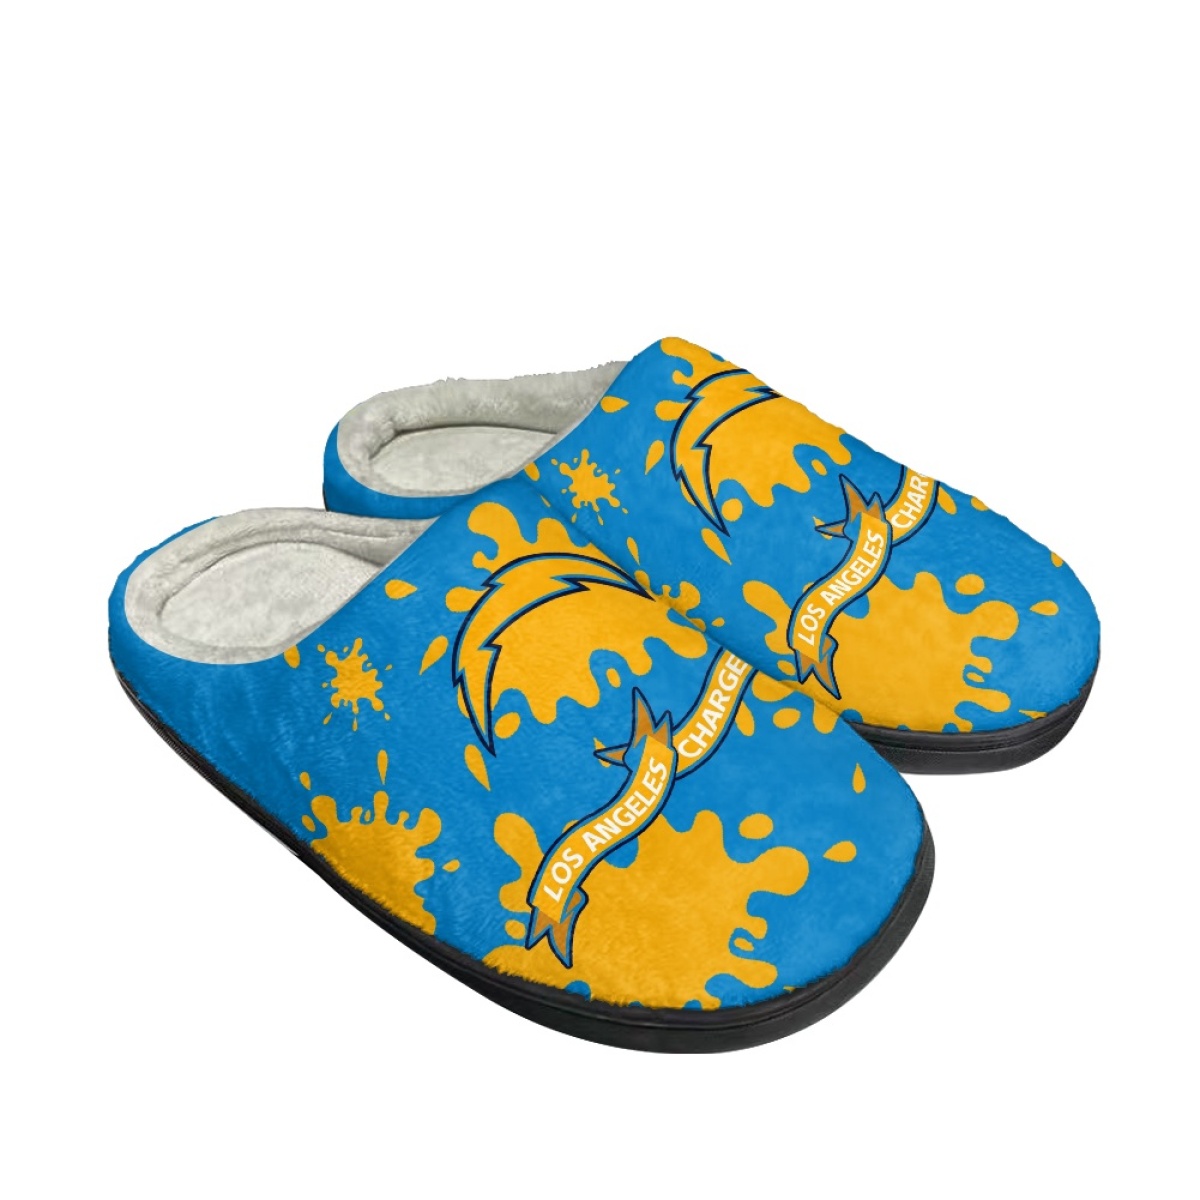 Men's Los Angeles Chargers Slippers/Shoes 005